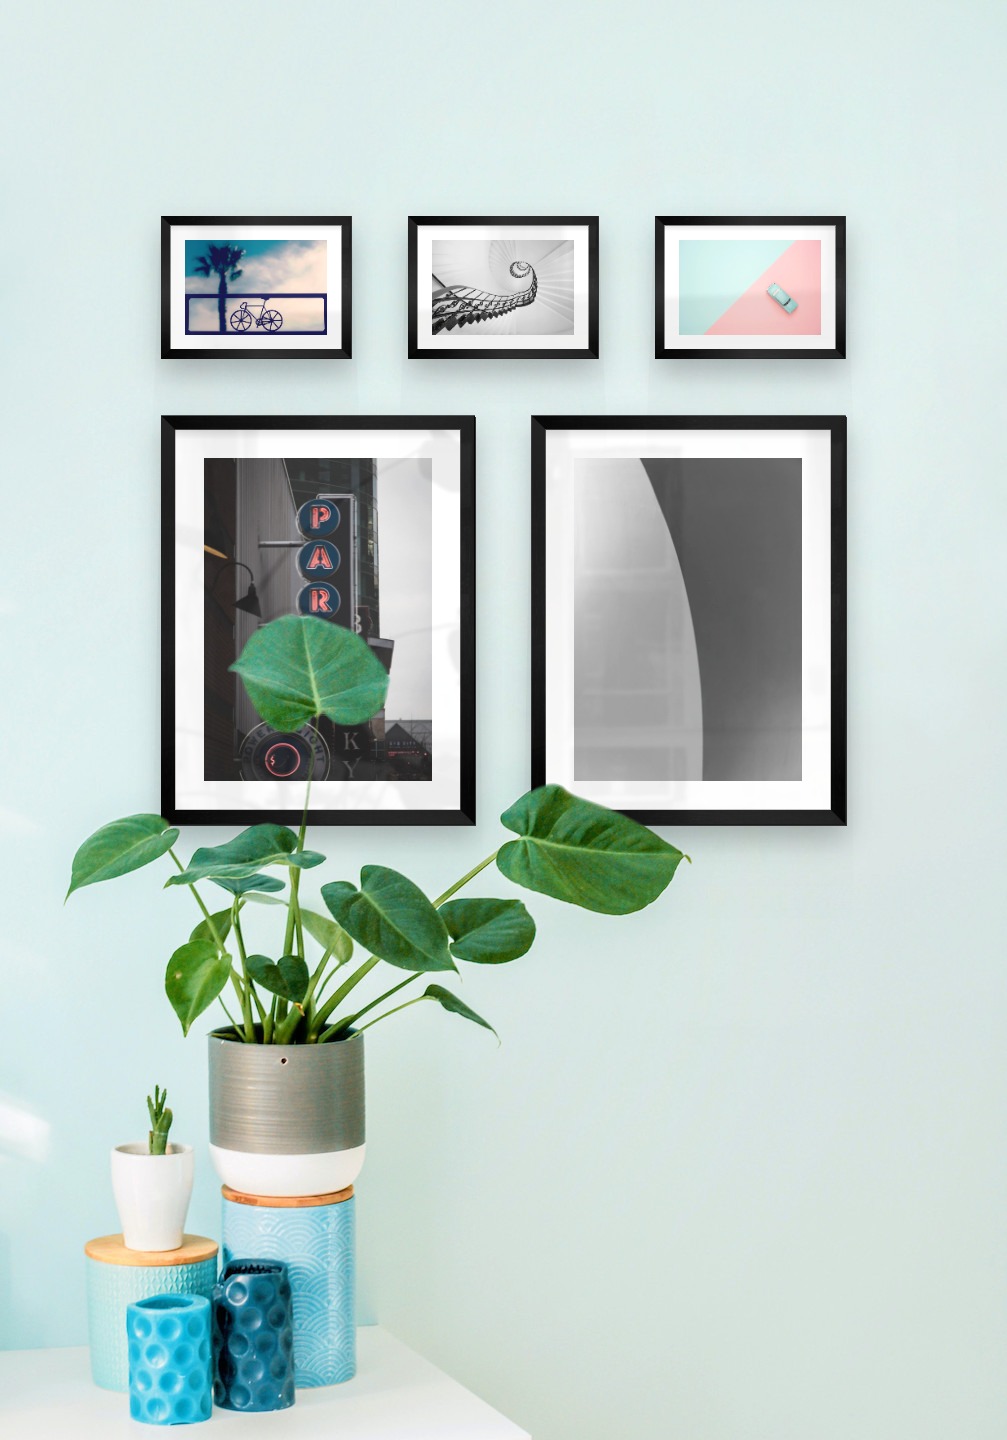 Gallery wall with picture frames in black in sizes 30x40 and 13x18 with prints "Sign "Park"", "Line", "Bicycle in front of sky", "Circular stair railing" and "Blue car and pink"